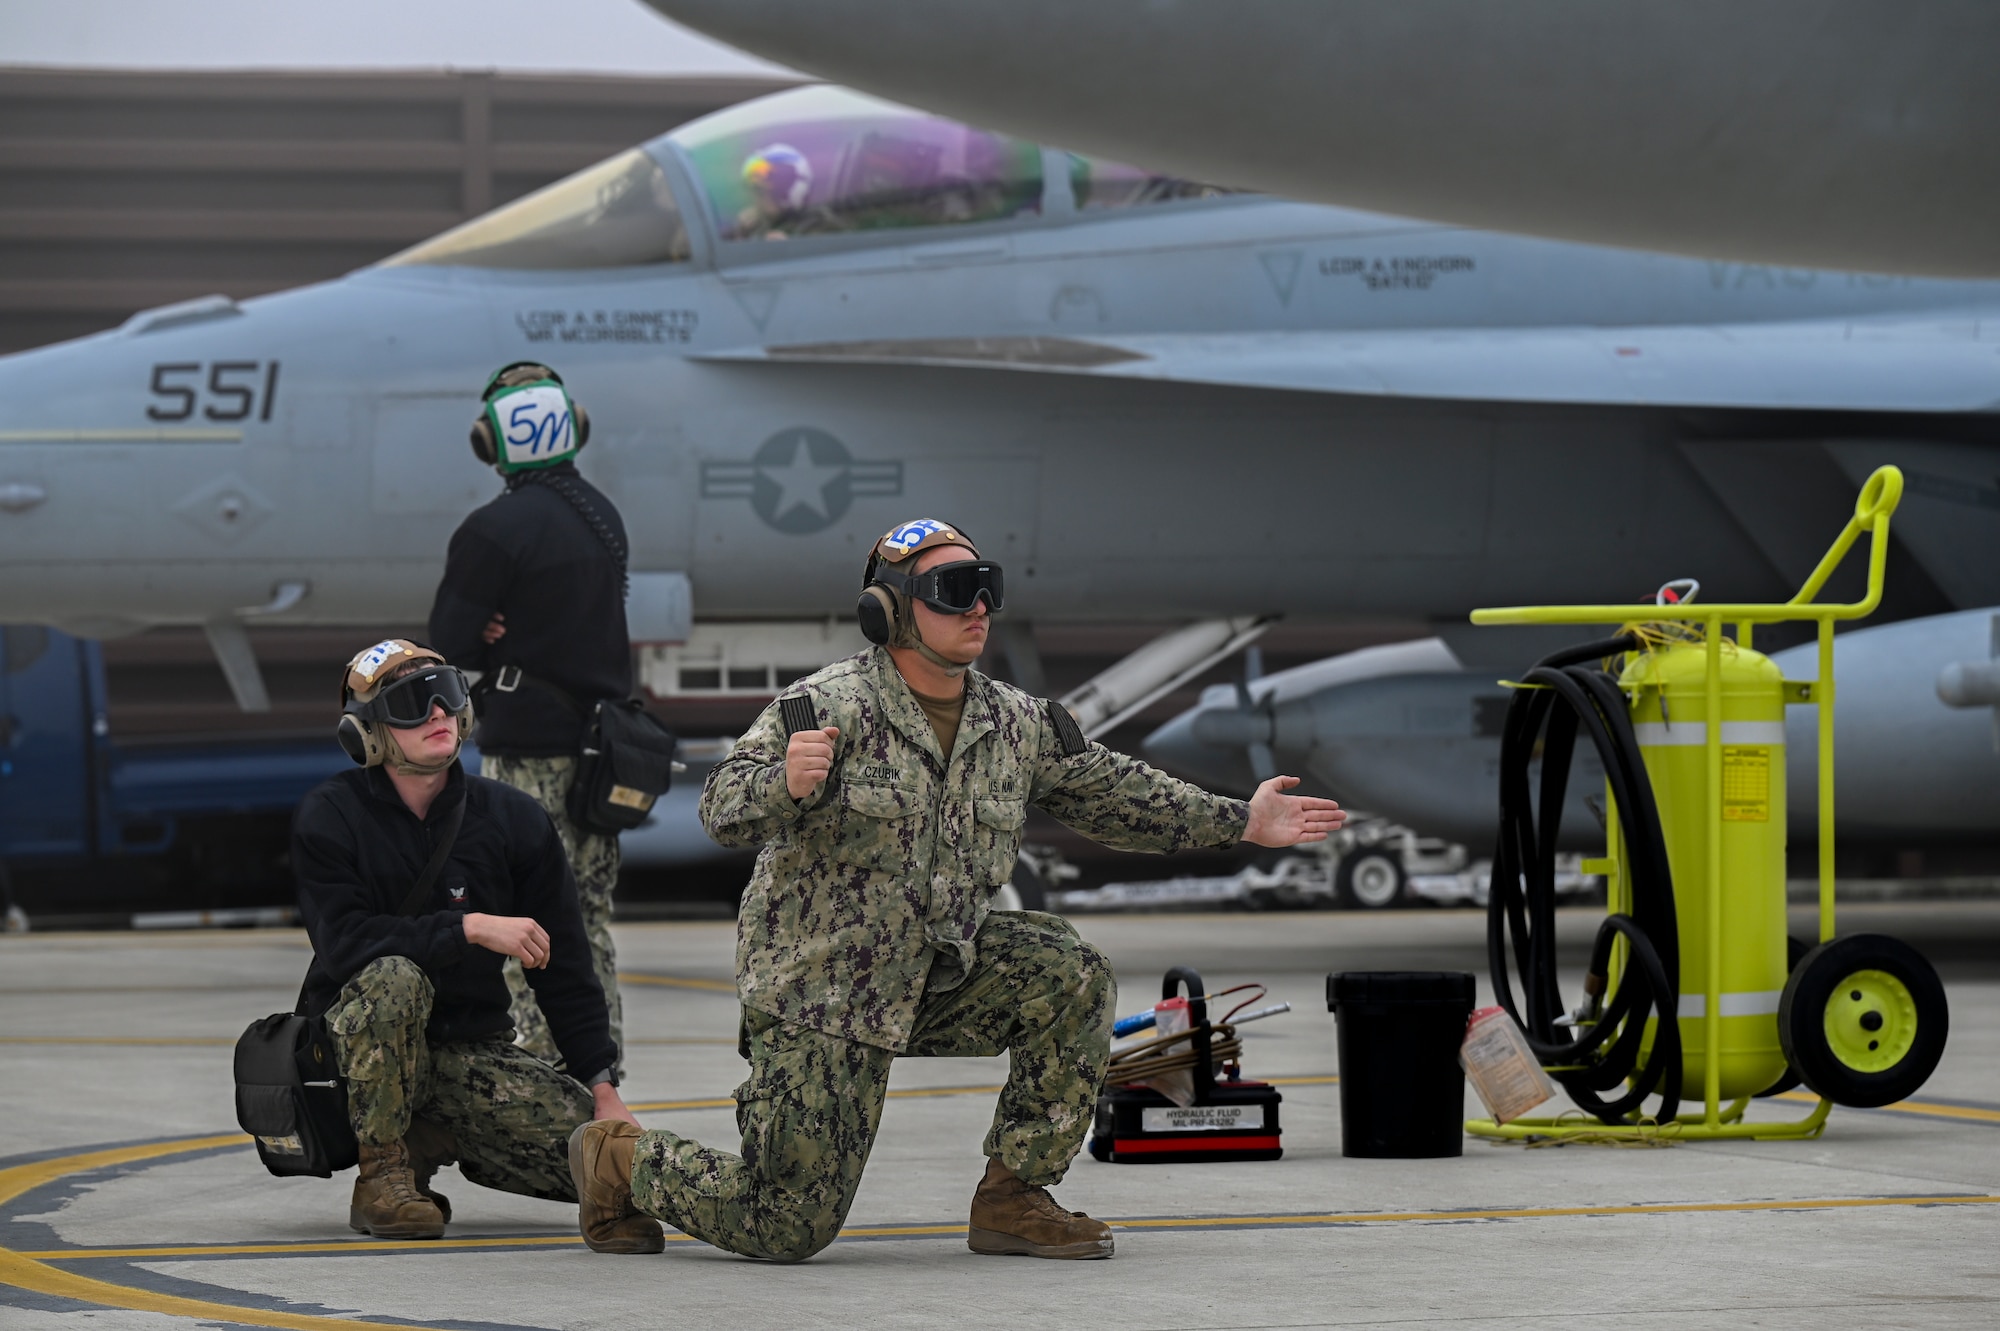 U.S. Navy Airmen assigned to Electronic Attack Squadron 131 at Naval Air Station Whidbey Island, Washington, perform preflight procedures with EA-18G Growlers during Vigilant Storm 23 at Osan Air Base, Republic of Korea, Nov. 1, 2022.